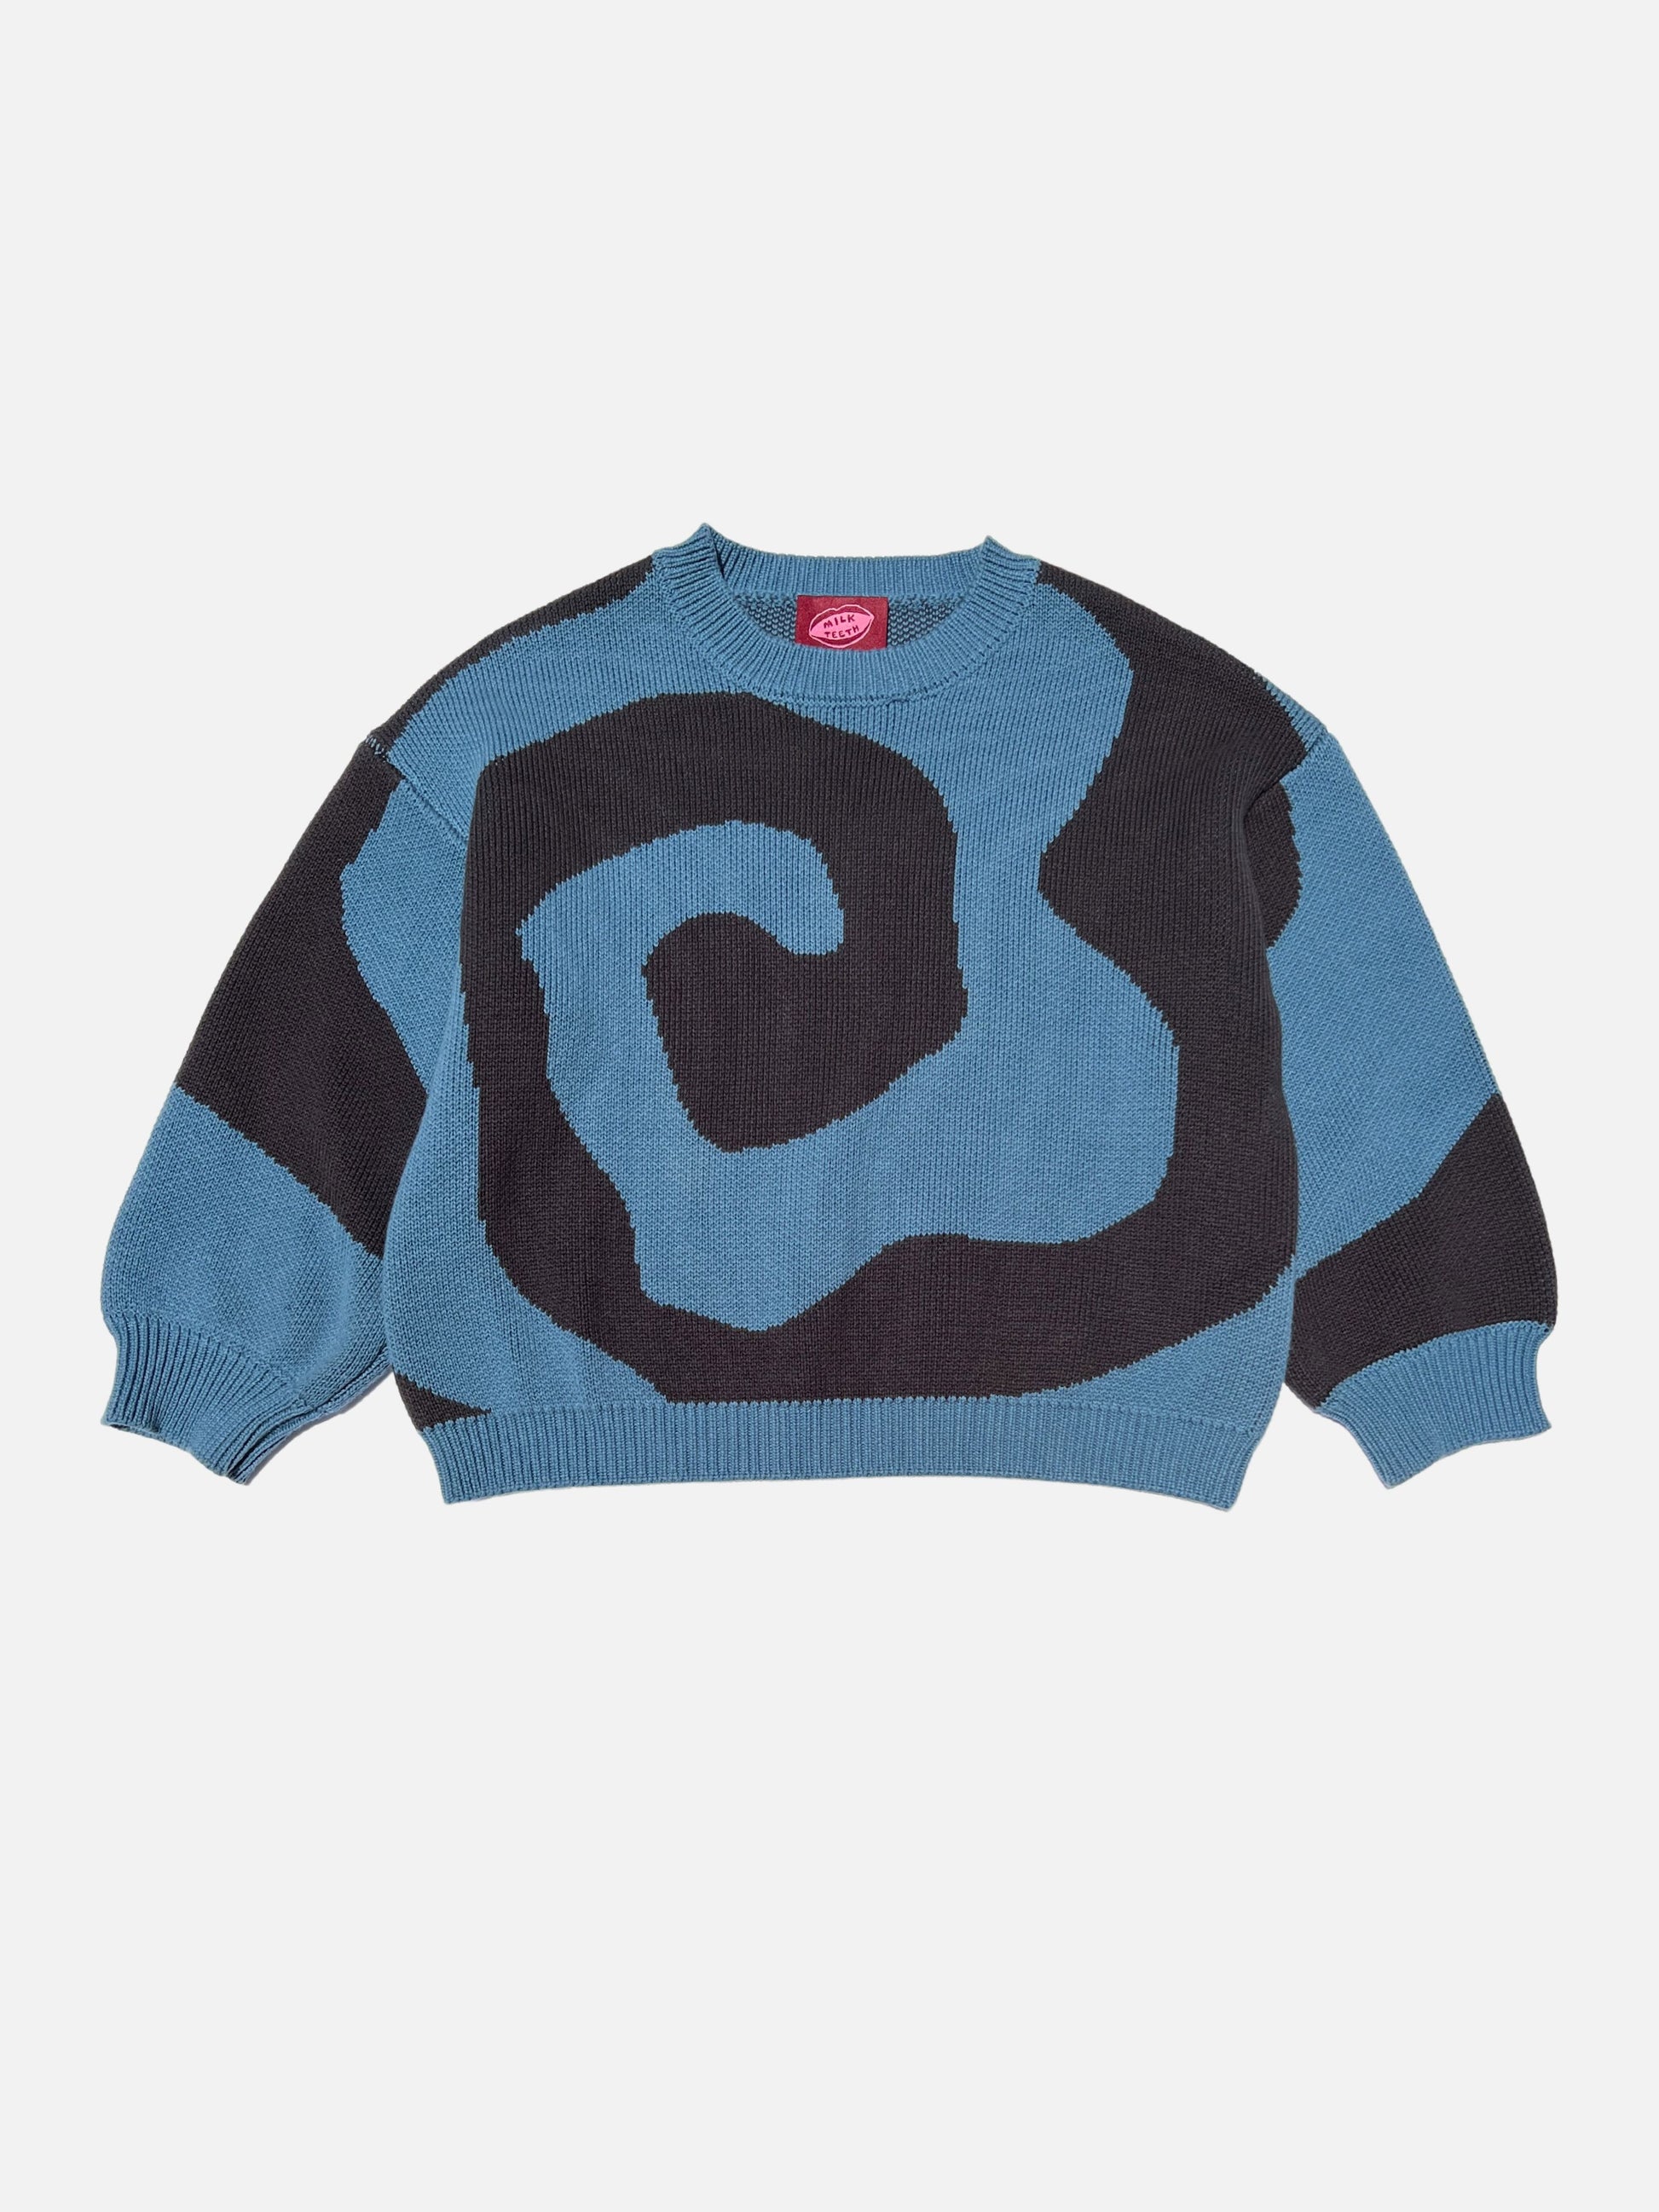 Front view of kids crewneck sweater in medium blue, with a large single charcoal grey swirl design that covers the entire sweater.